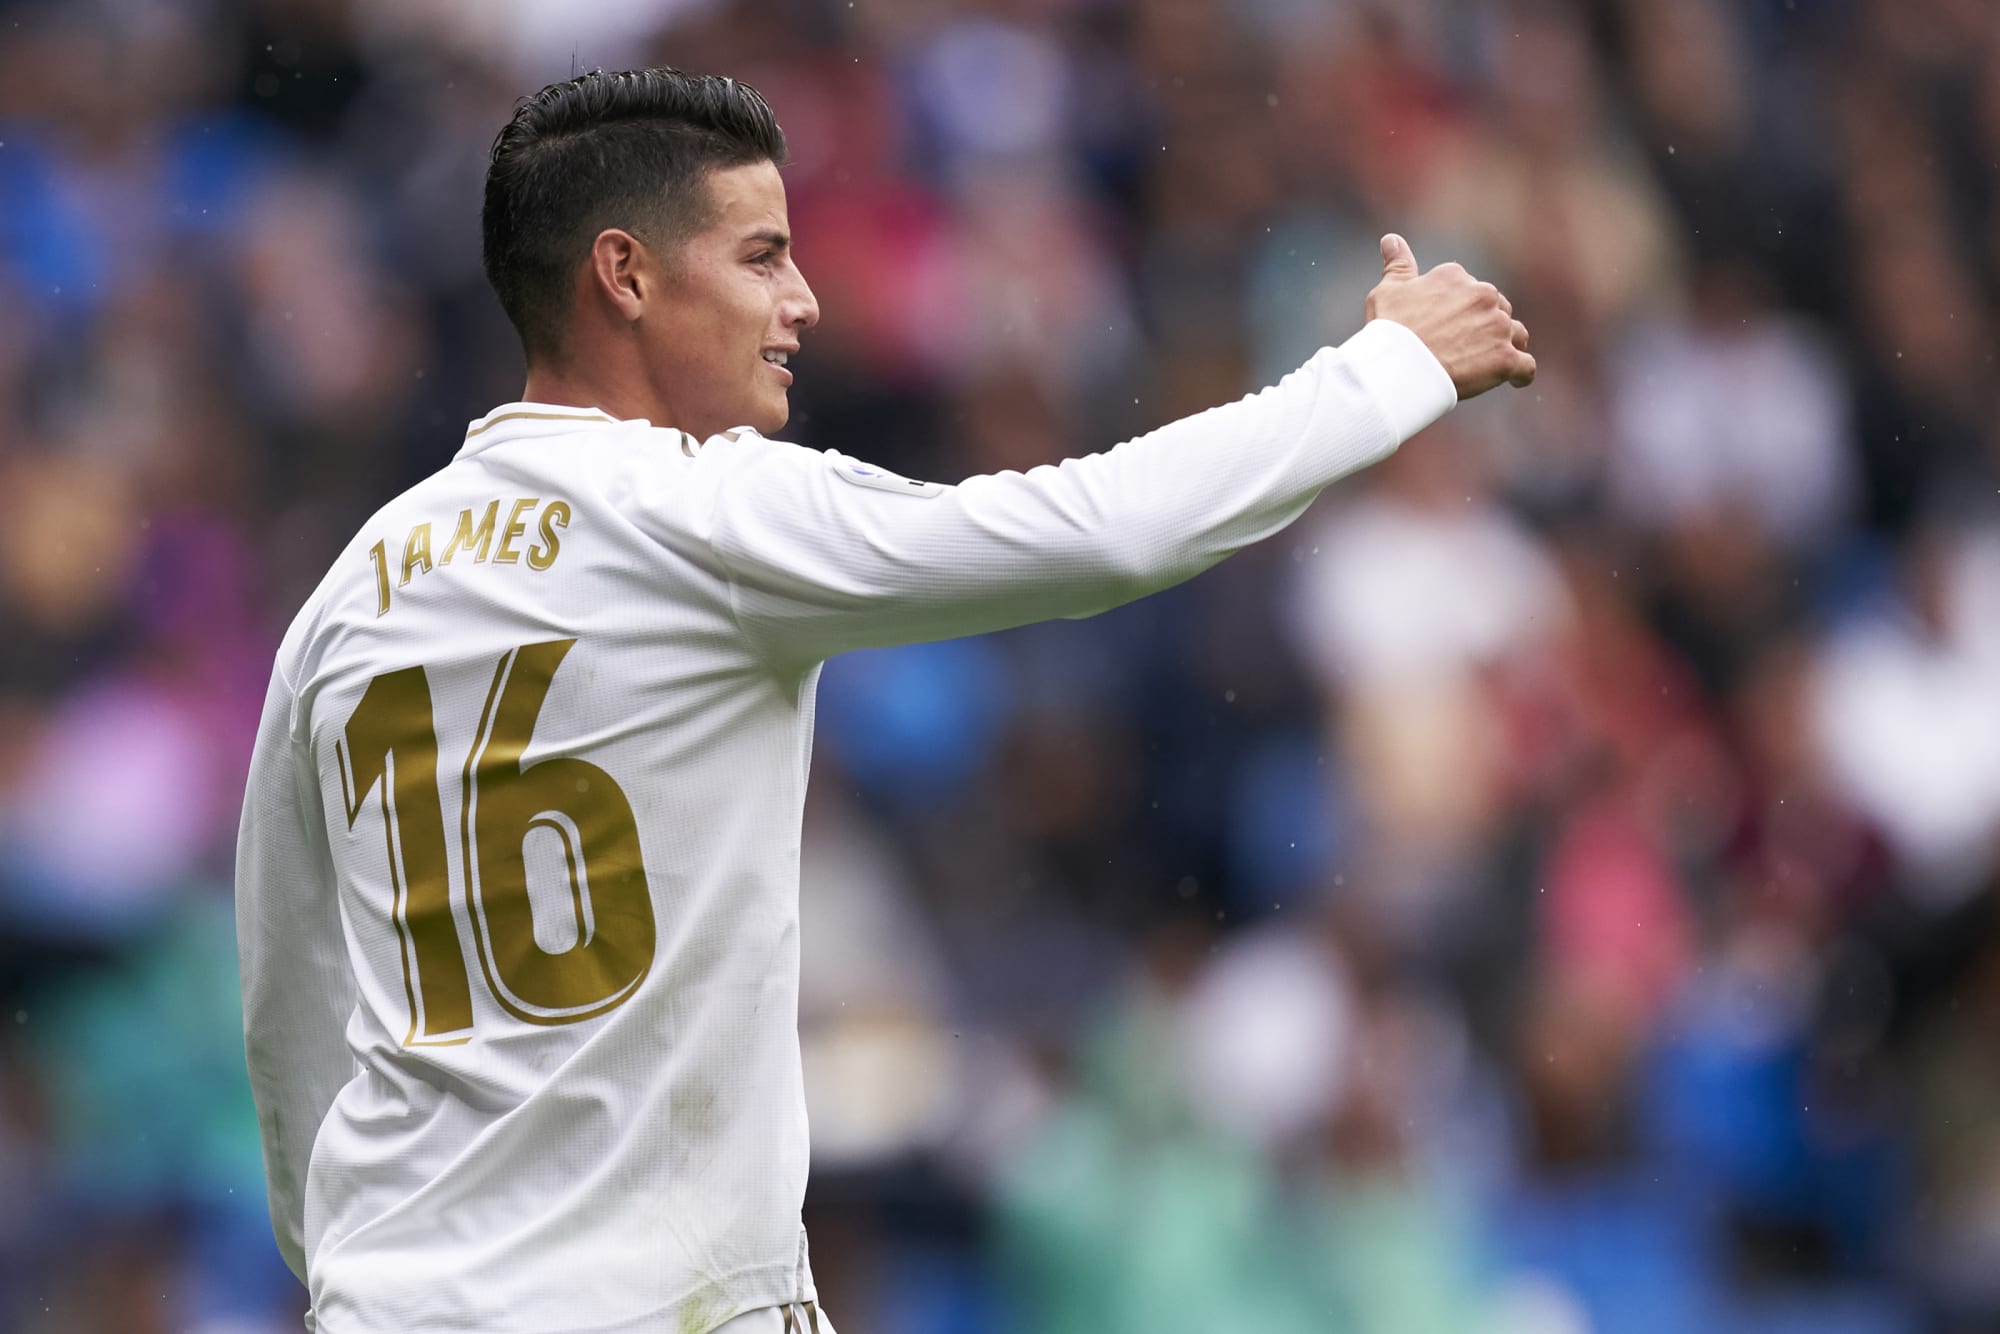 Real Madrid vs. Levante Takeaways: James Rodriguez's high importance